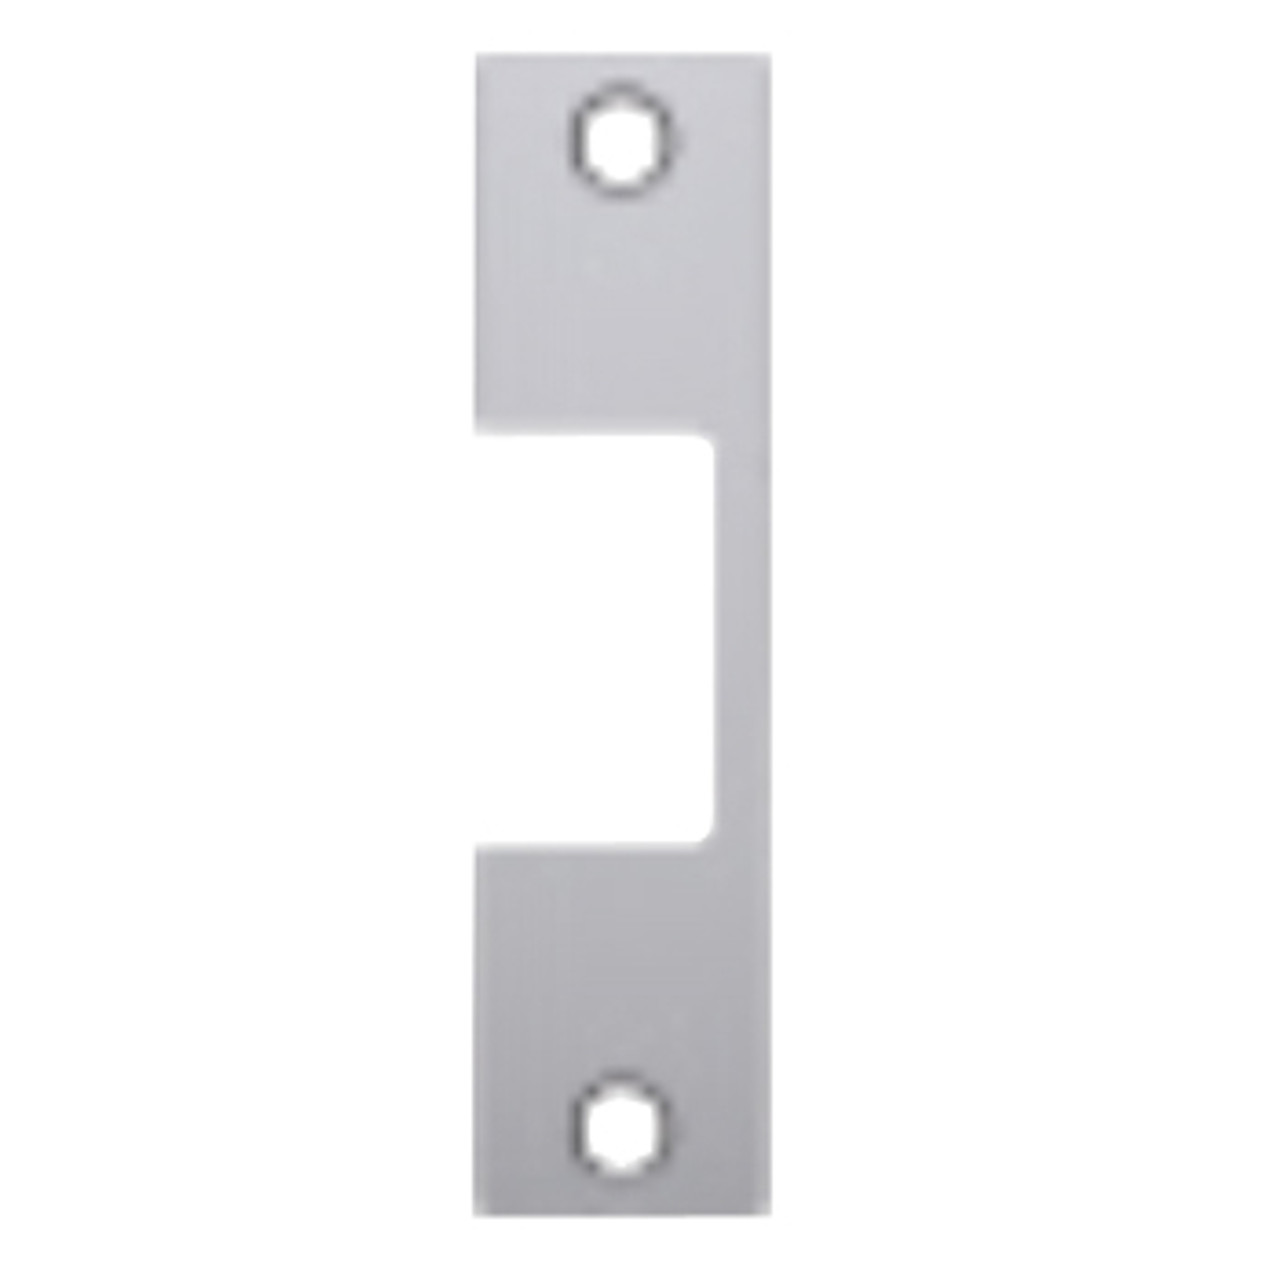 E-630 Hes 4-7/8" x 1-1/4" Faceplate in Satin Stainless Finish